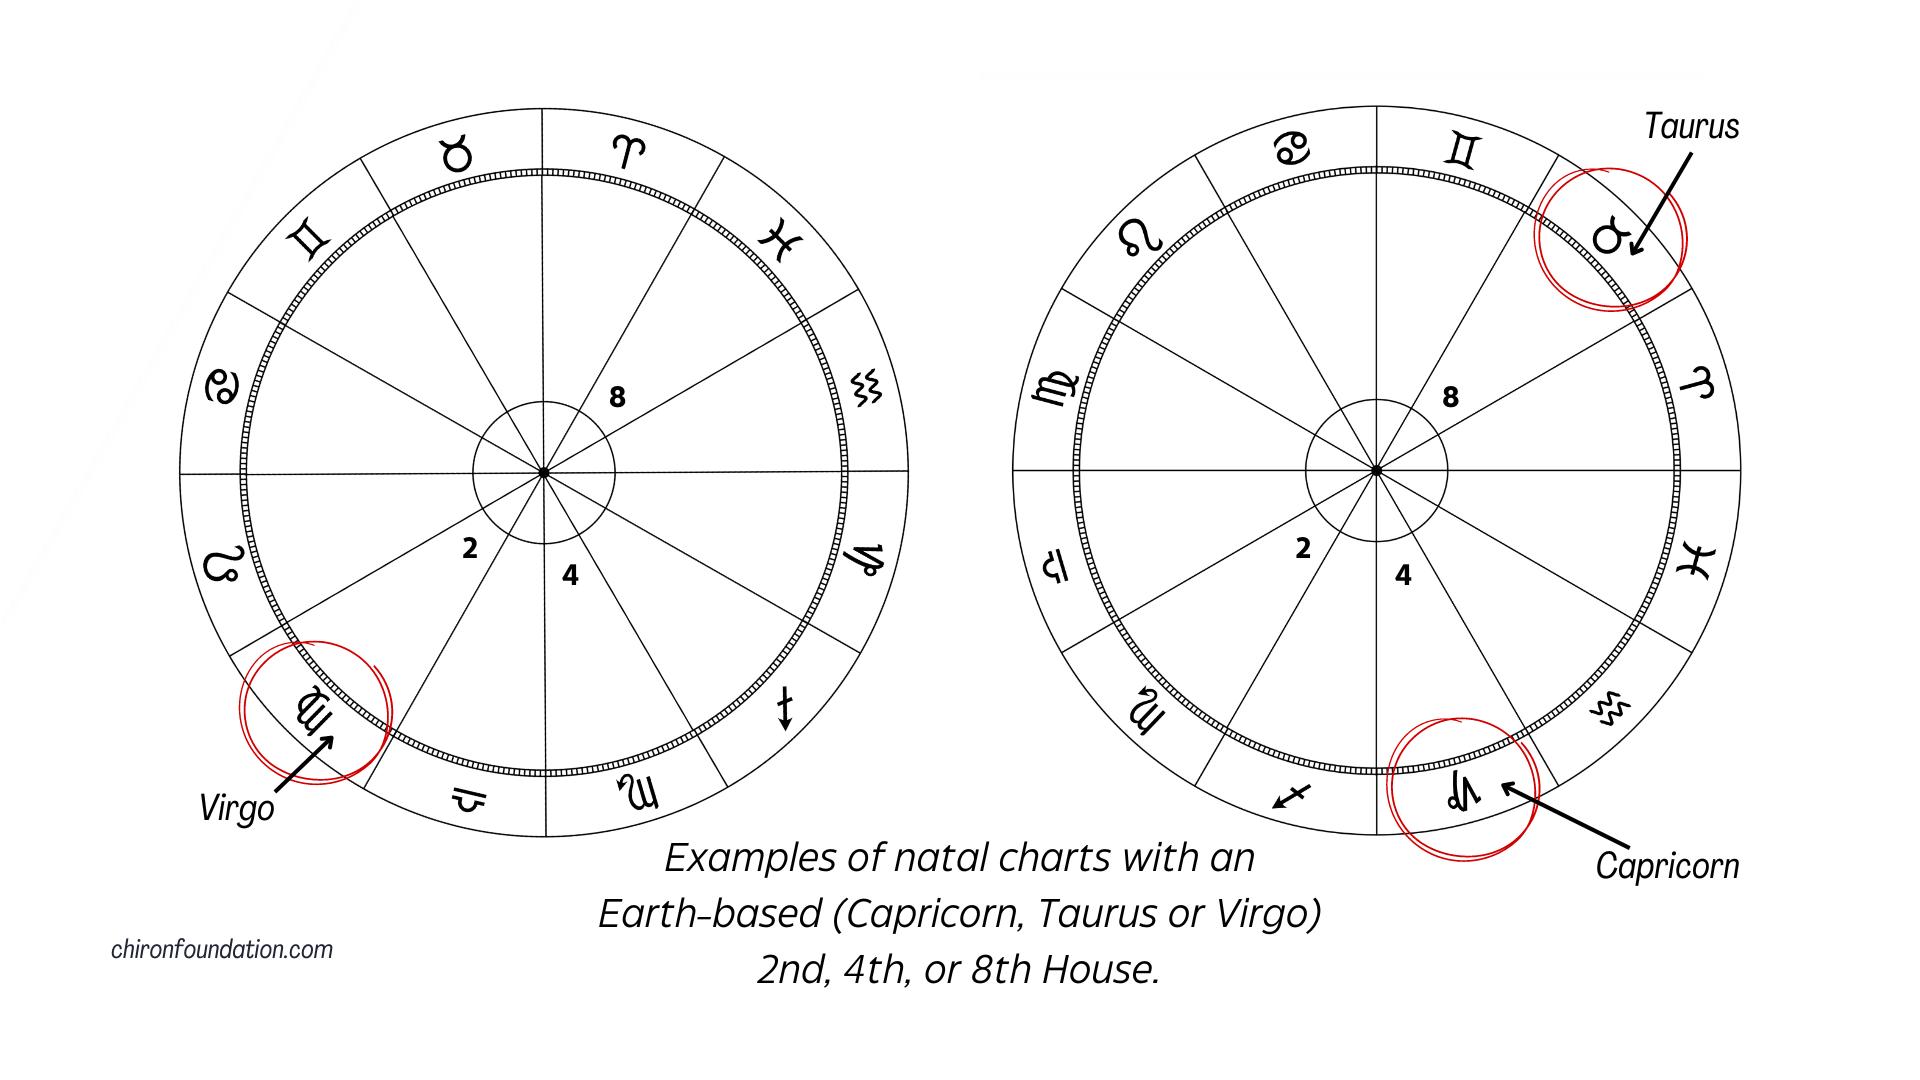 Examples of natal charts with an Earth-based (Capricorn, Taurus or Virgo) 2nd, 4th, or 8th House